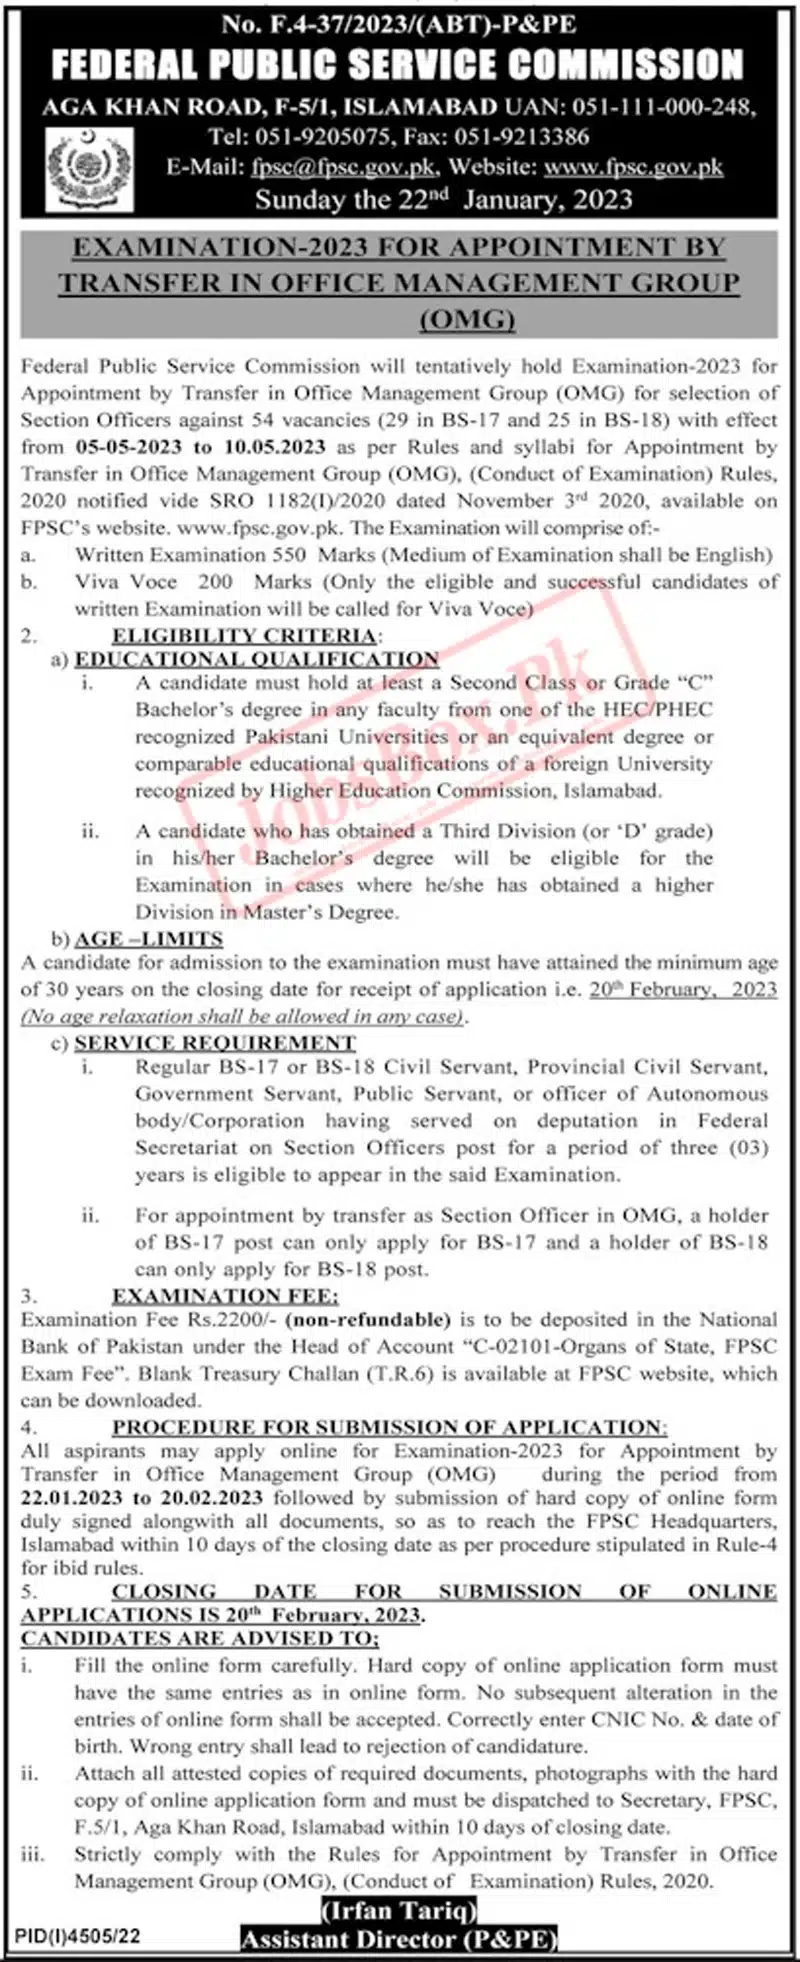 FPSC Jobs Examination 2023 for Appointment by Transfer at OMG